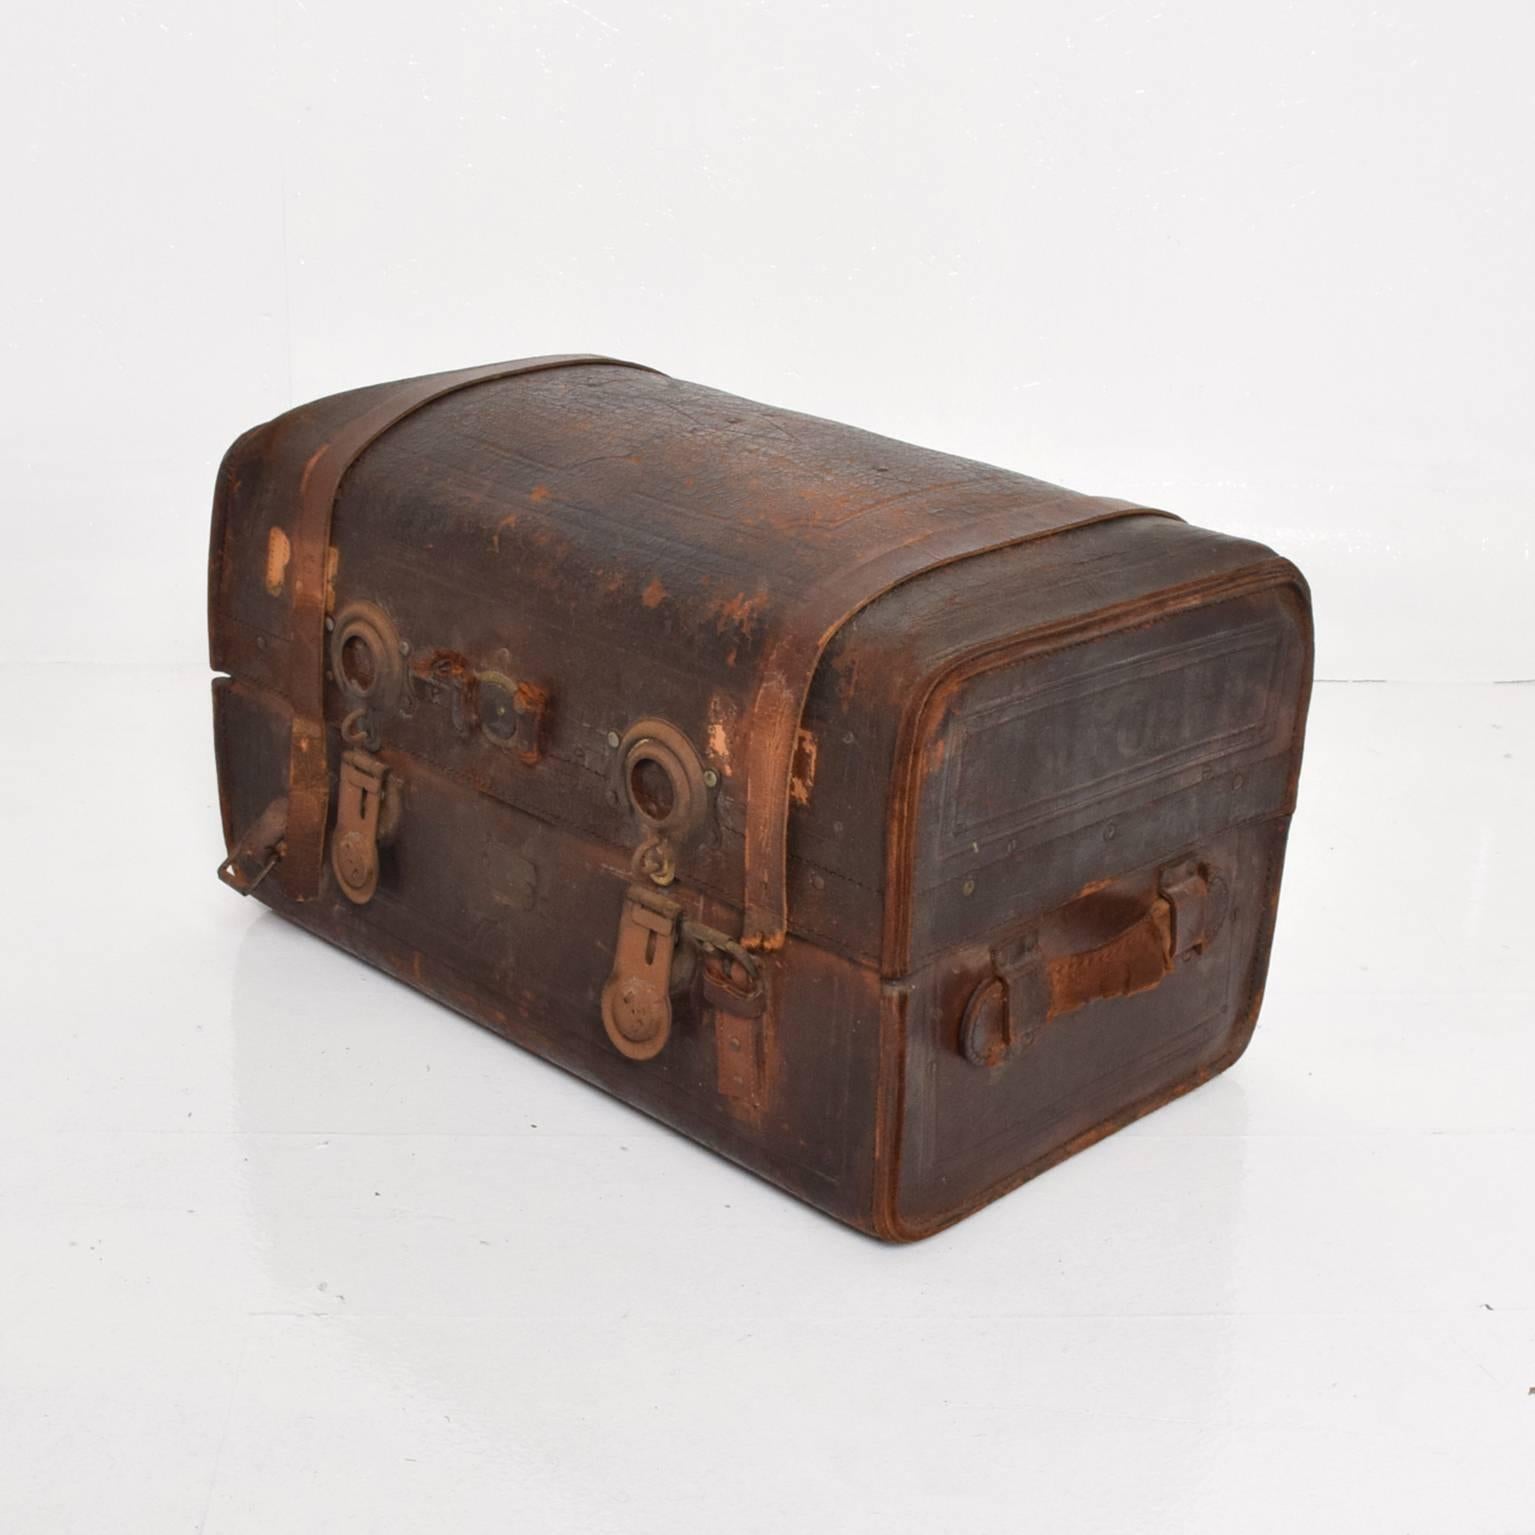 Patinated Antique Travel Leather Trunk Suitcase